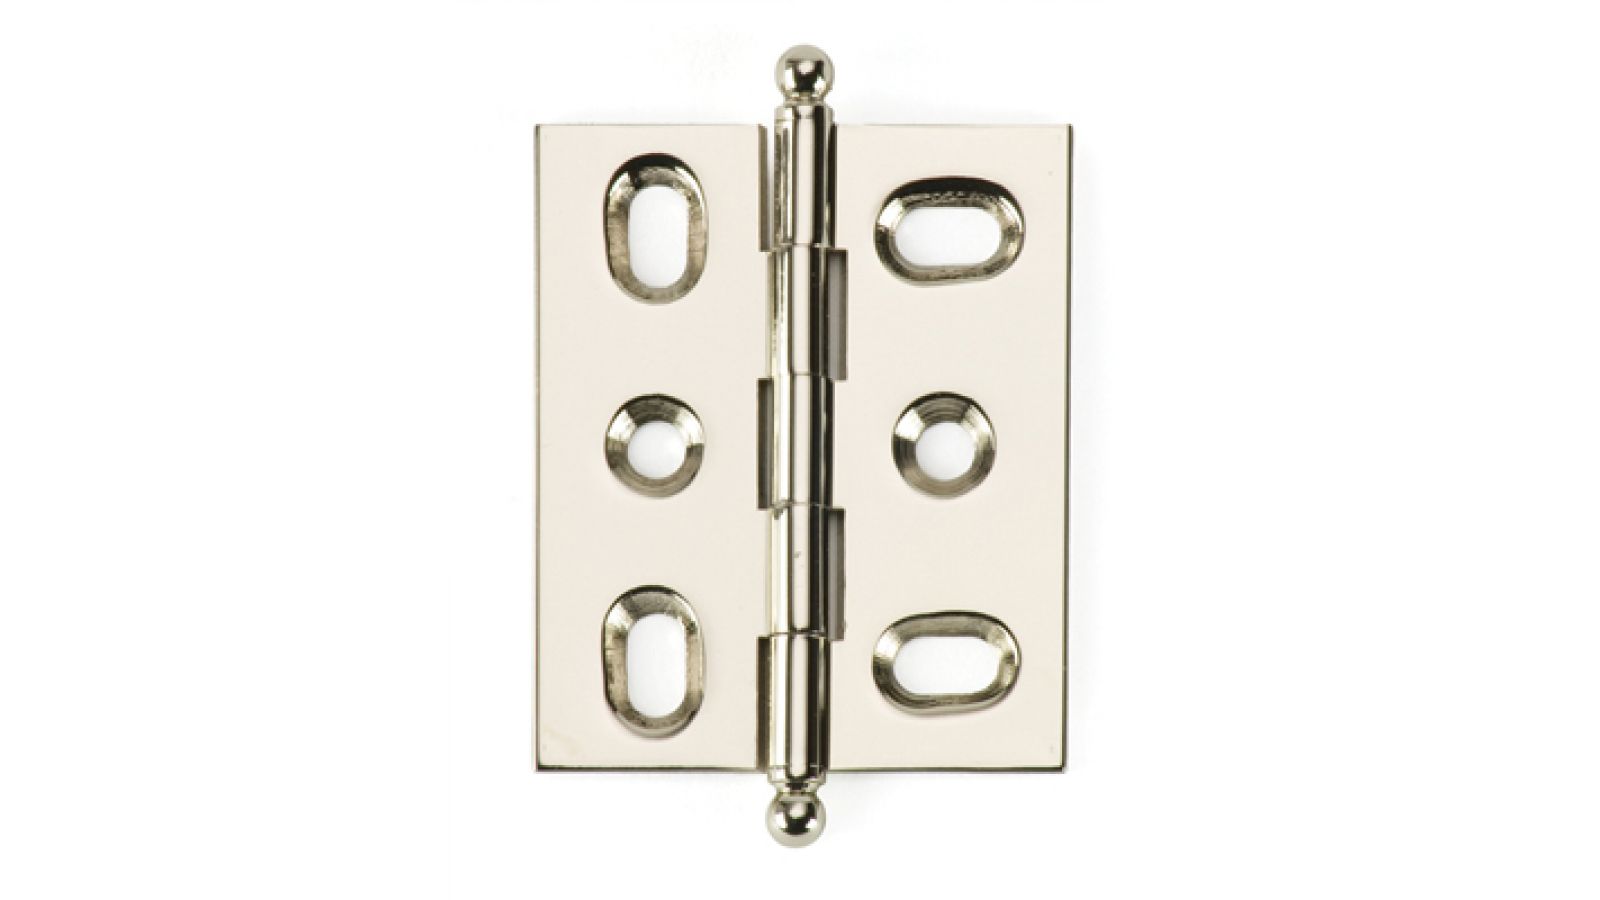 The BH2A Series cabinet hinge